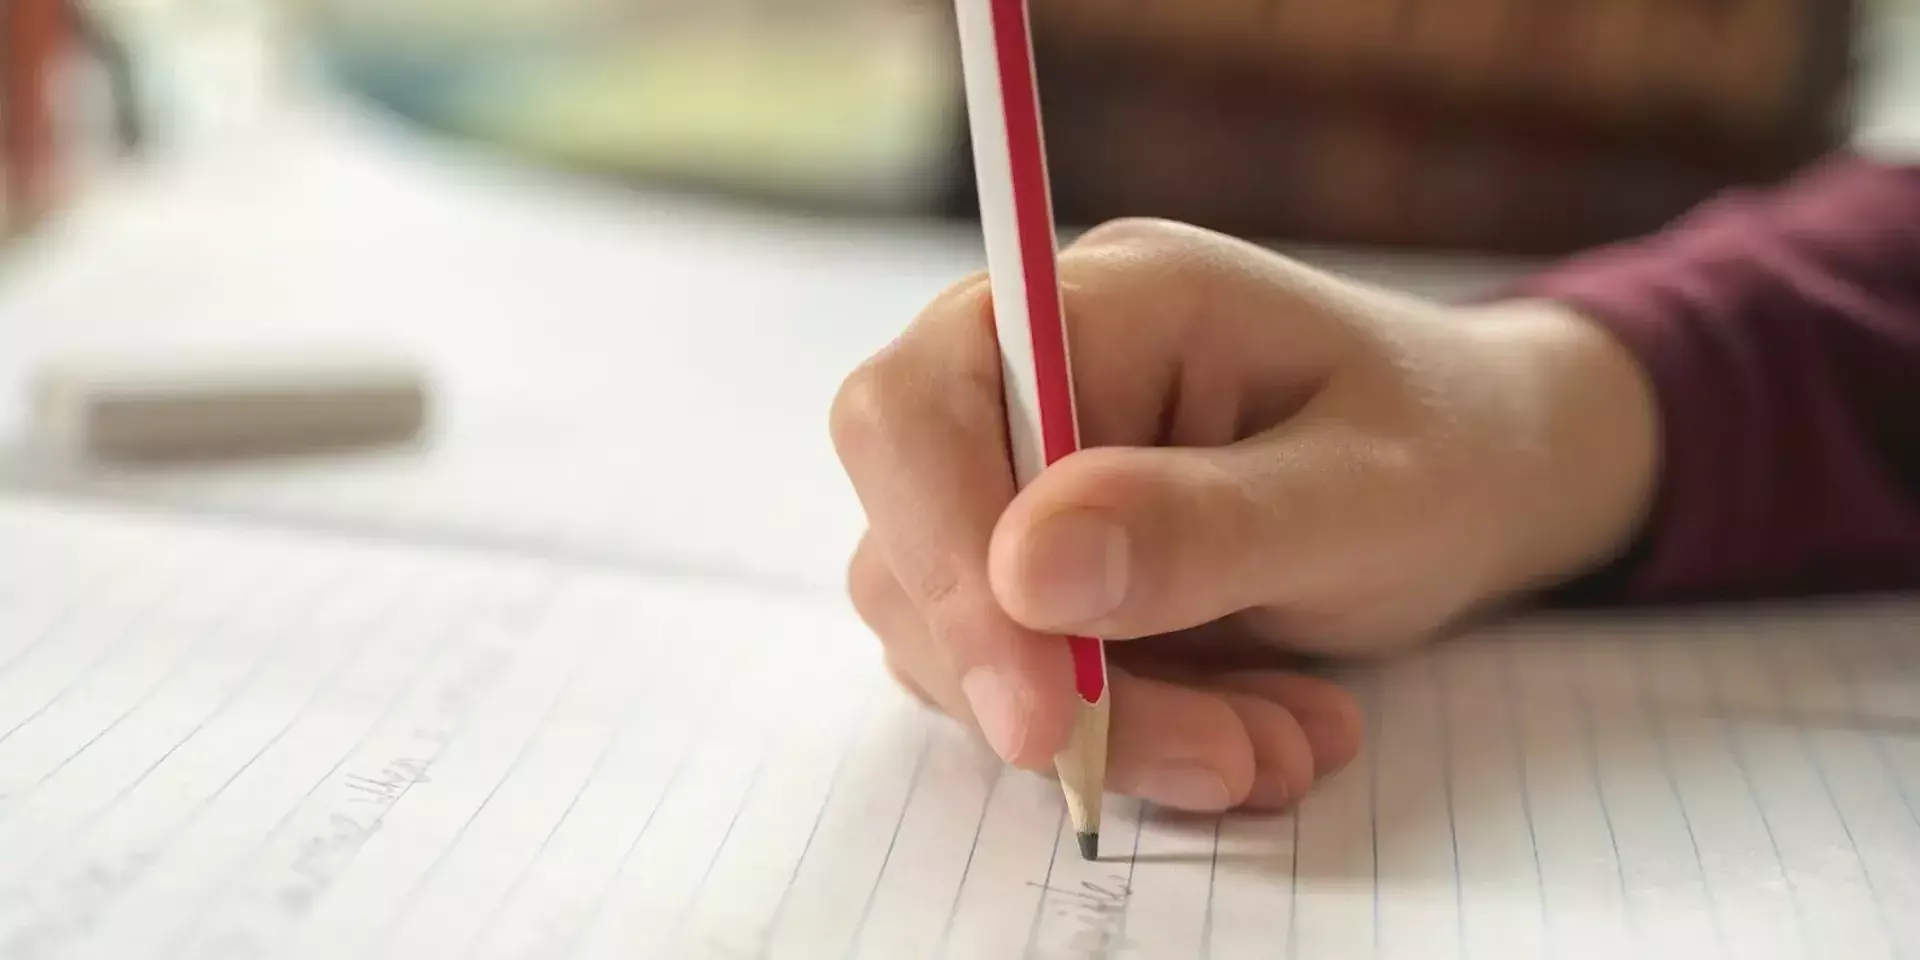 a child writing on a sheet of paper with a pencil